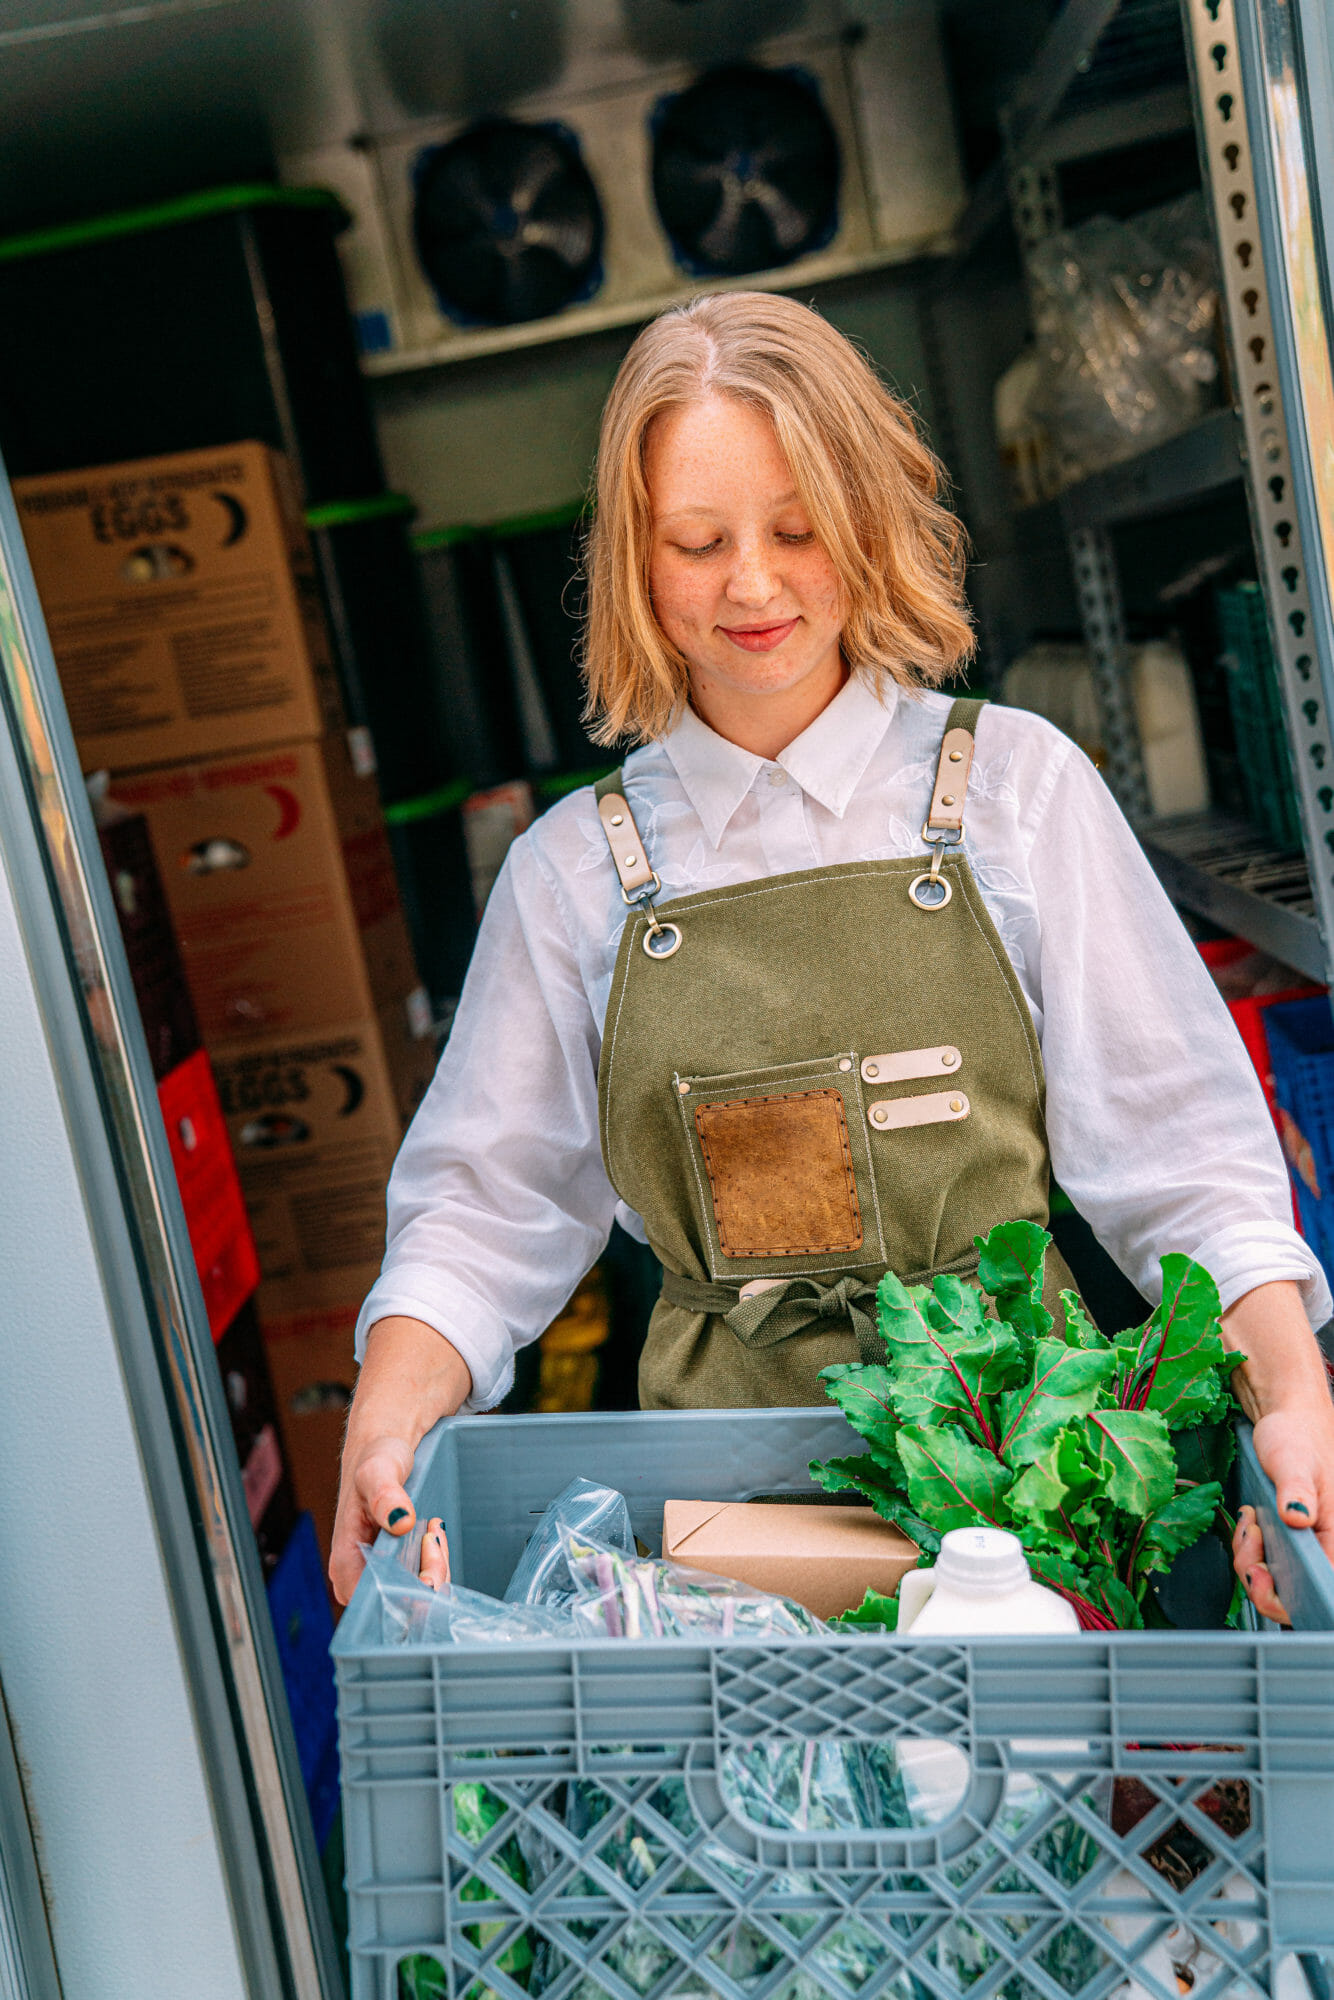 Portrait of a Happy Young Caucasian Woman Standing at the Door of a Walk-In Refrigerator Holding a Basket of Delicious, Healthy, Organic Produce at a Local Small Business Farm-to-Table Supplier in Colorado